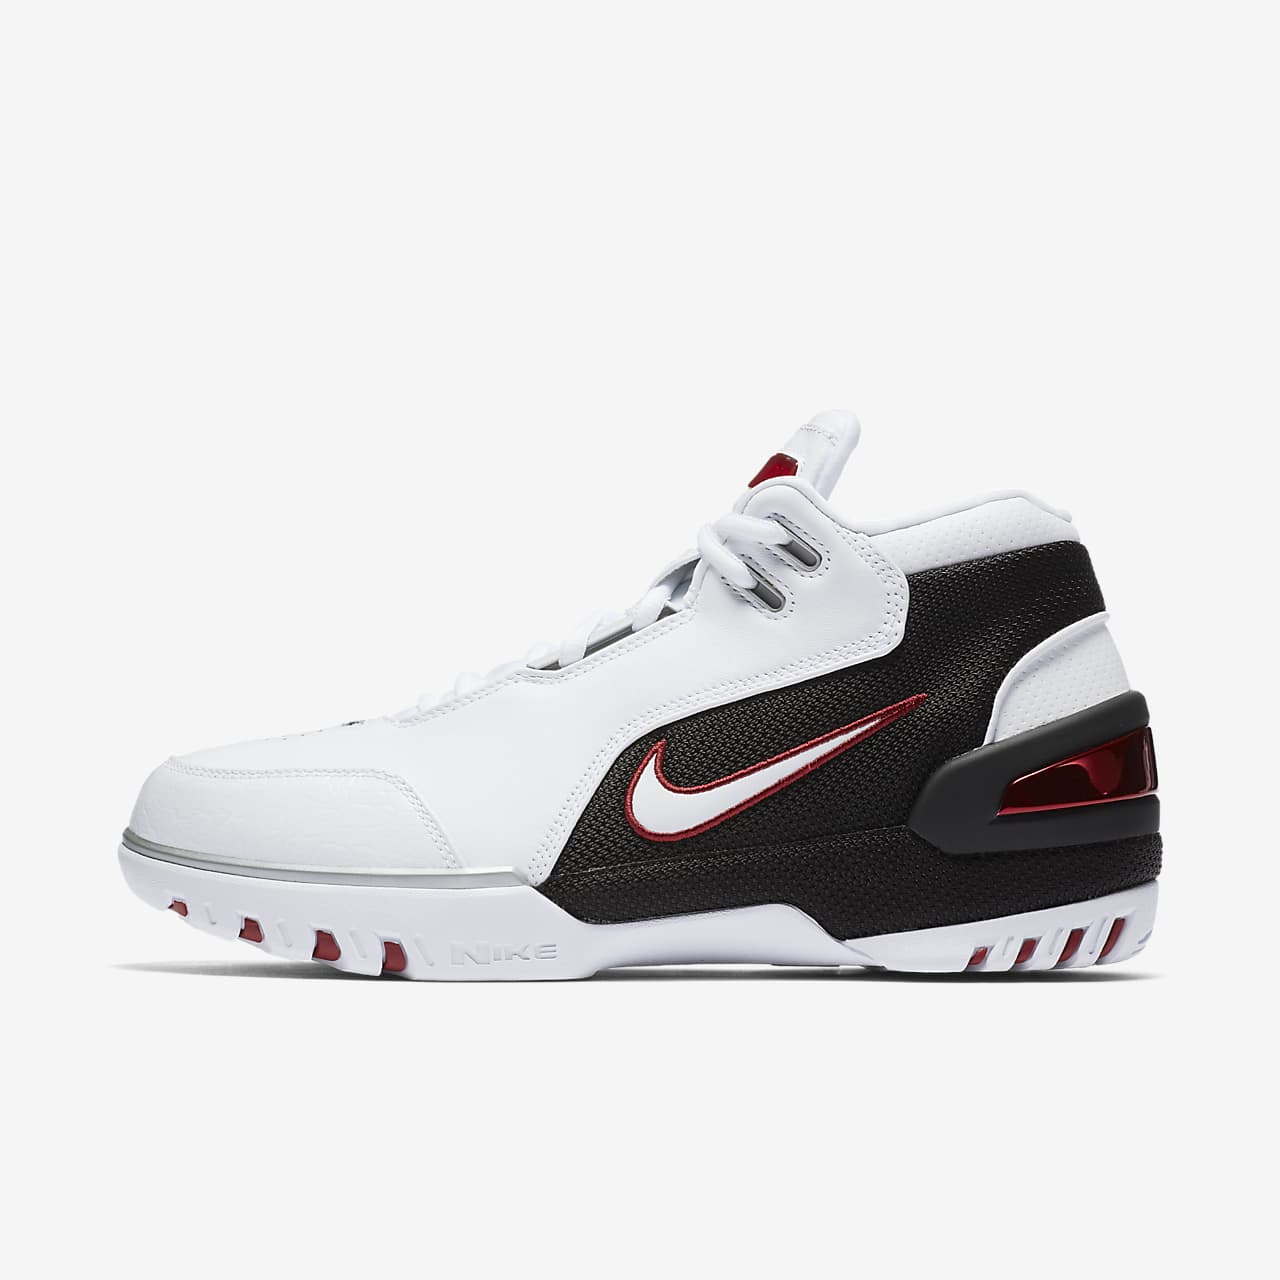 lebron james air zoom generation nike shoes